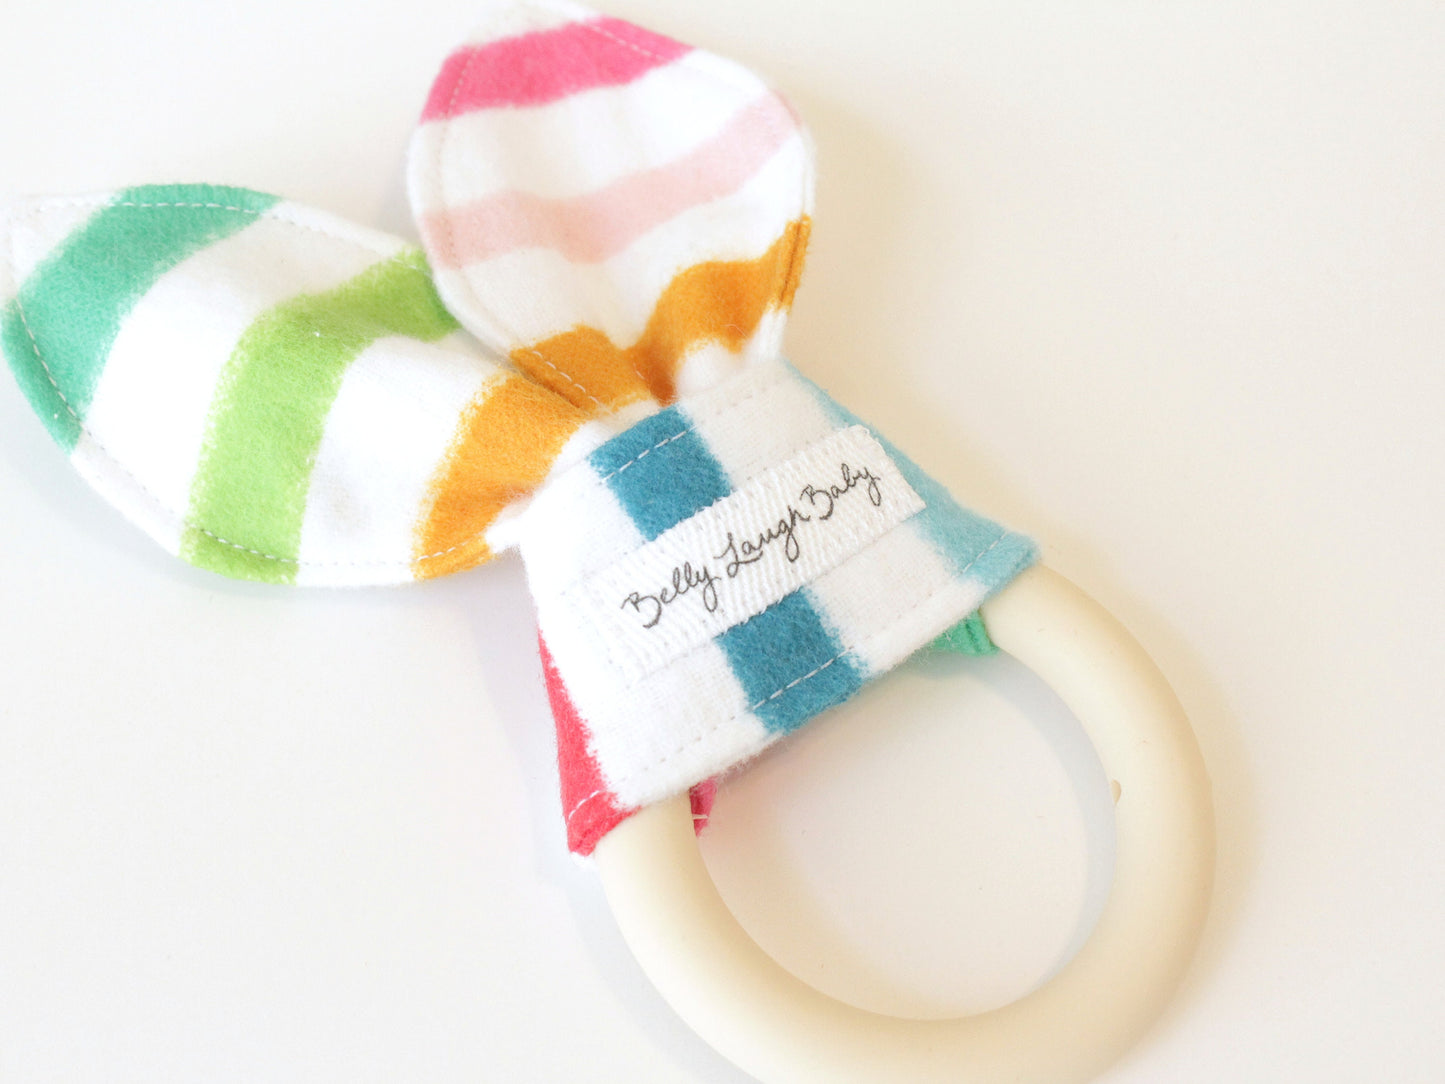 Rainbow Stripe Silicone Bunny Ear Teether | Gender Neutral Baby Shower Gift Sensory Toy | CPSC Compliant